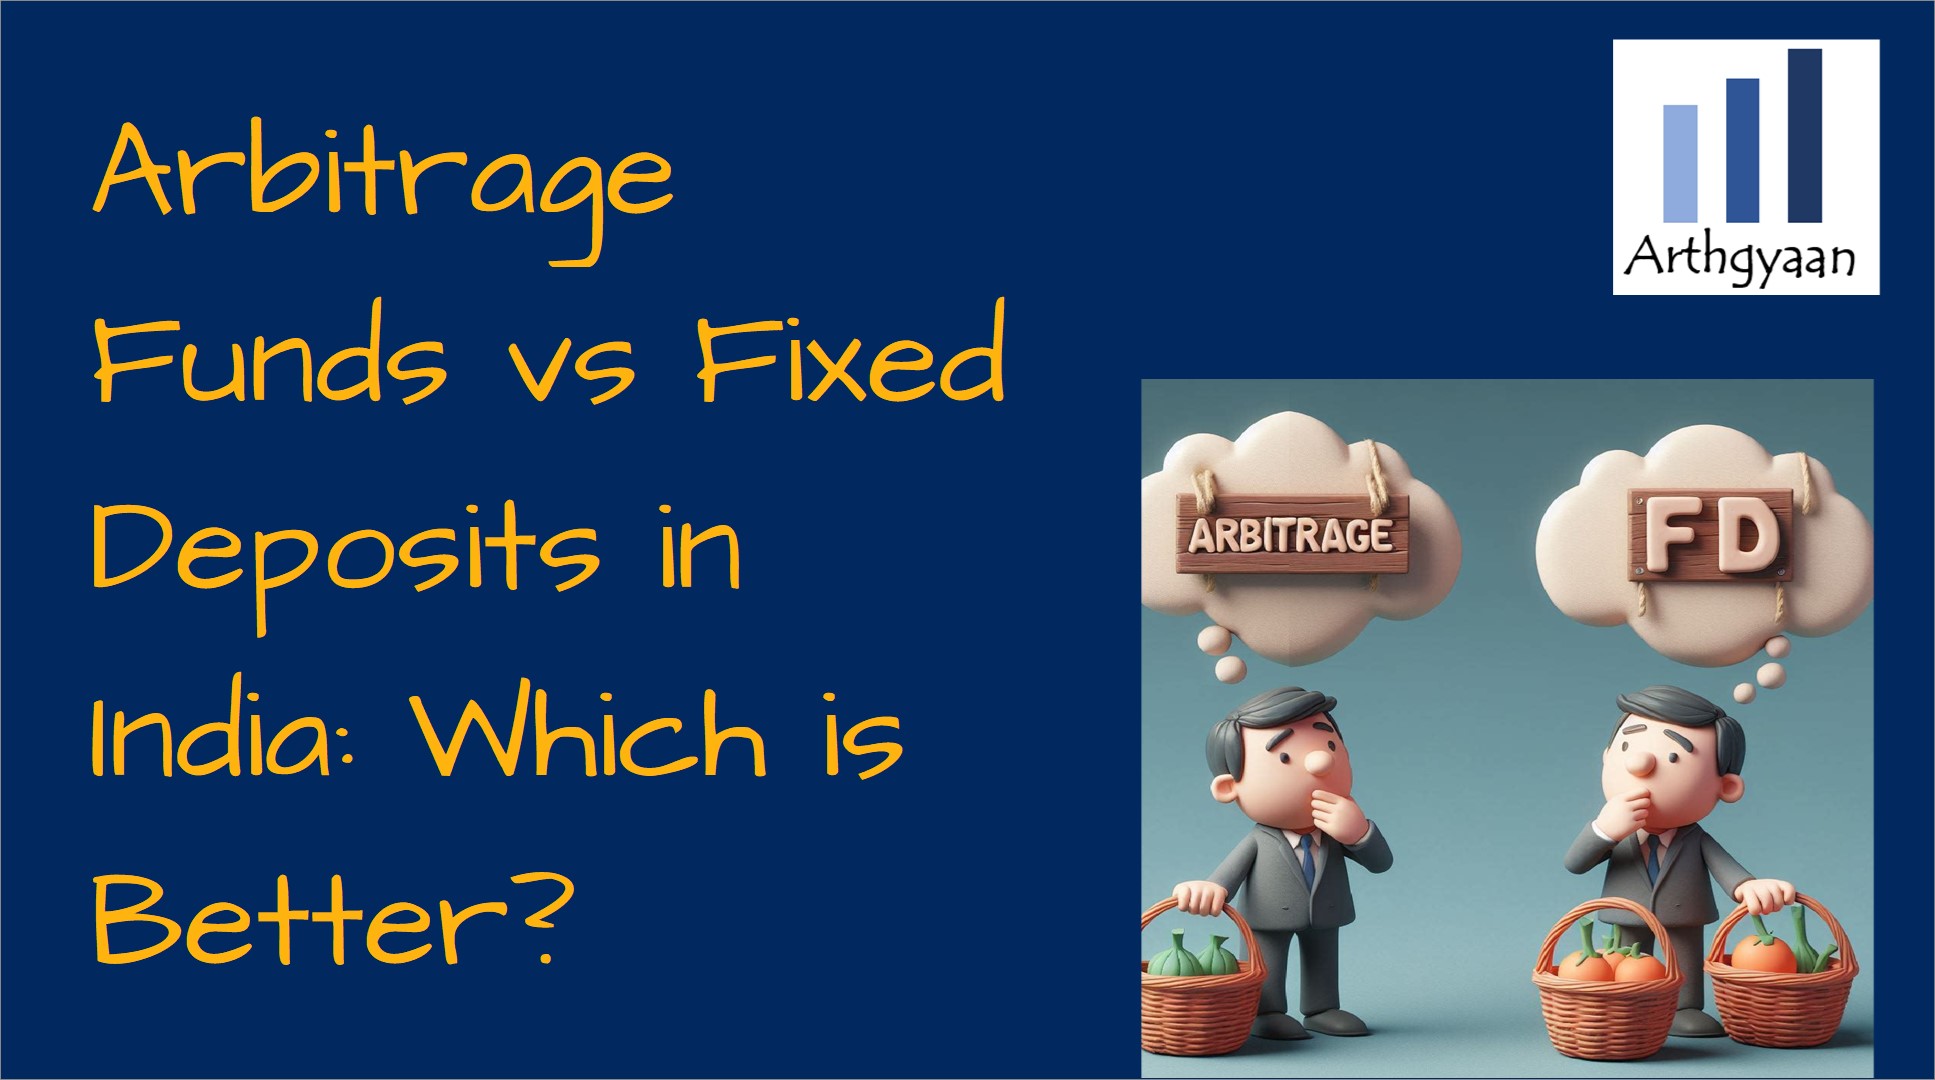 Arbitrage Funds vs Fixed Deposits in India: Which is Better?